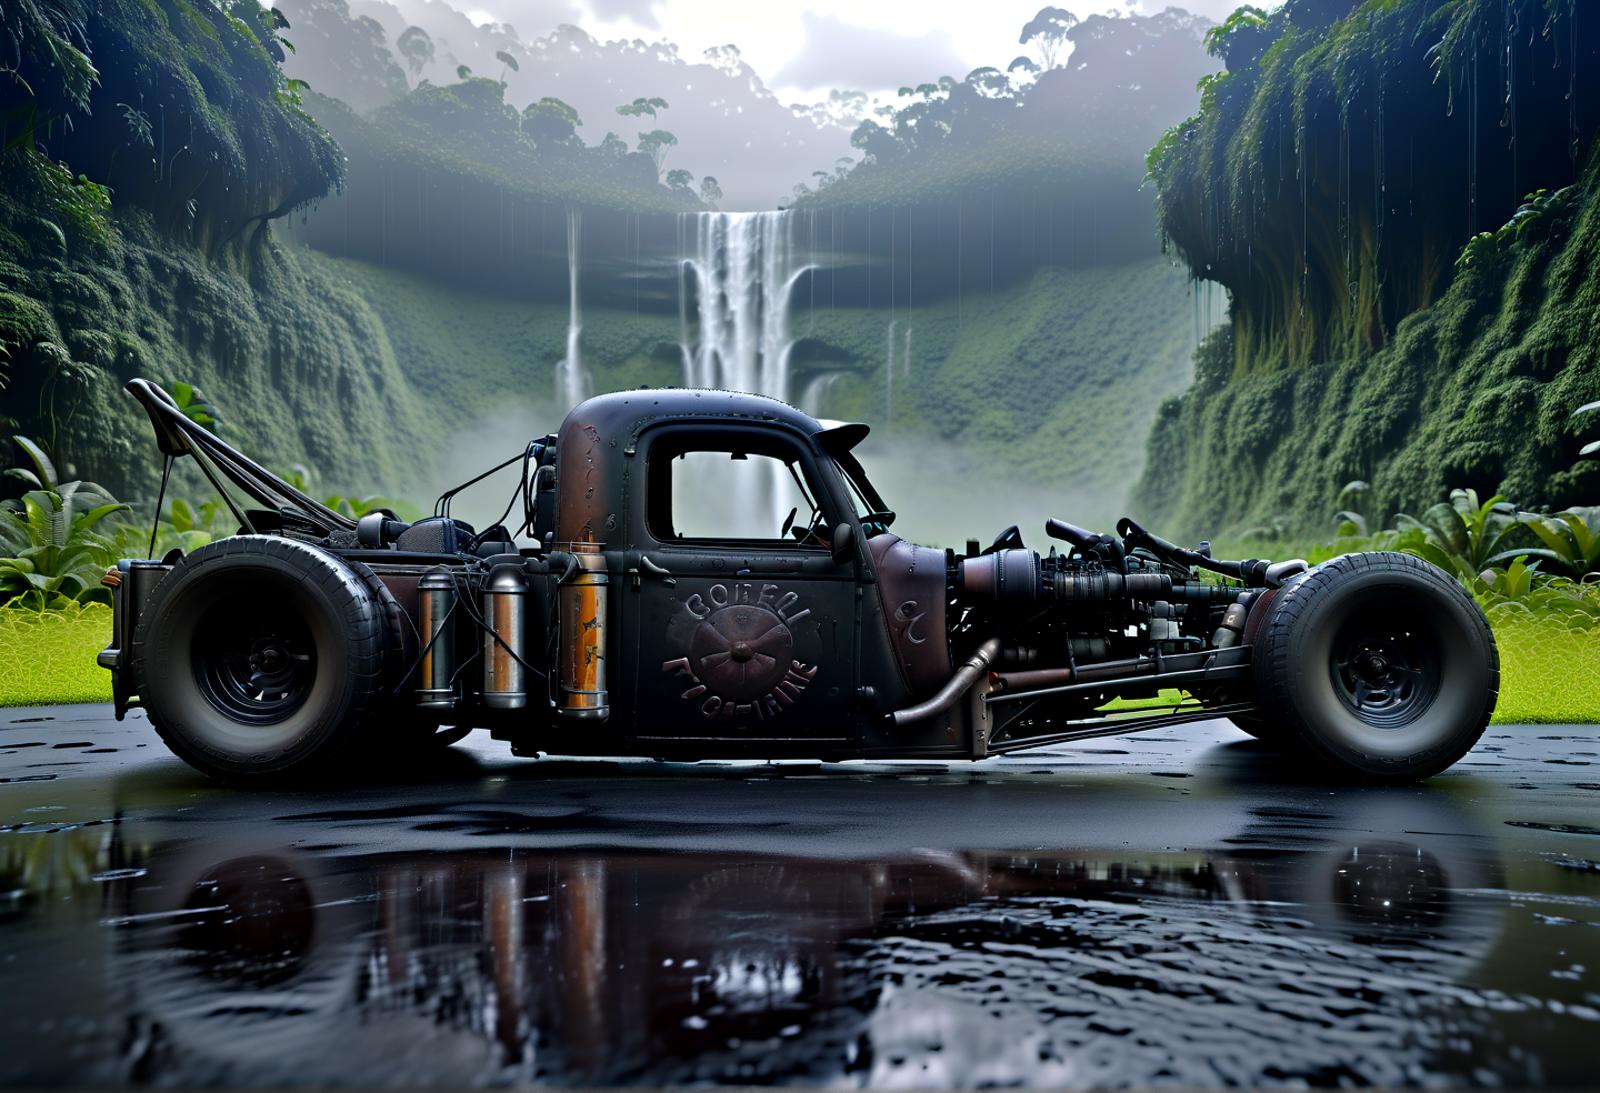 Rat Rod - The Wrecker From Hell (1936 Plymouth) [SDXL] image by denrakeiw